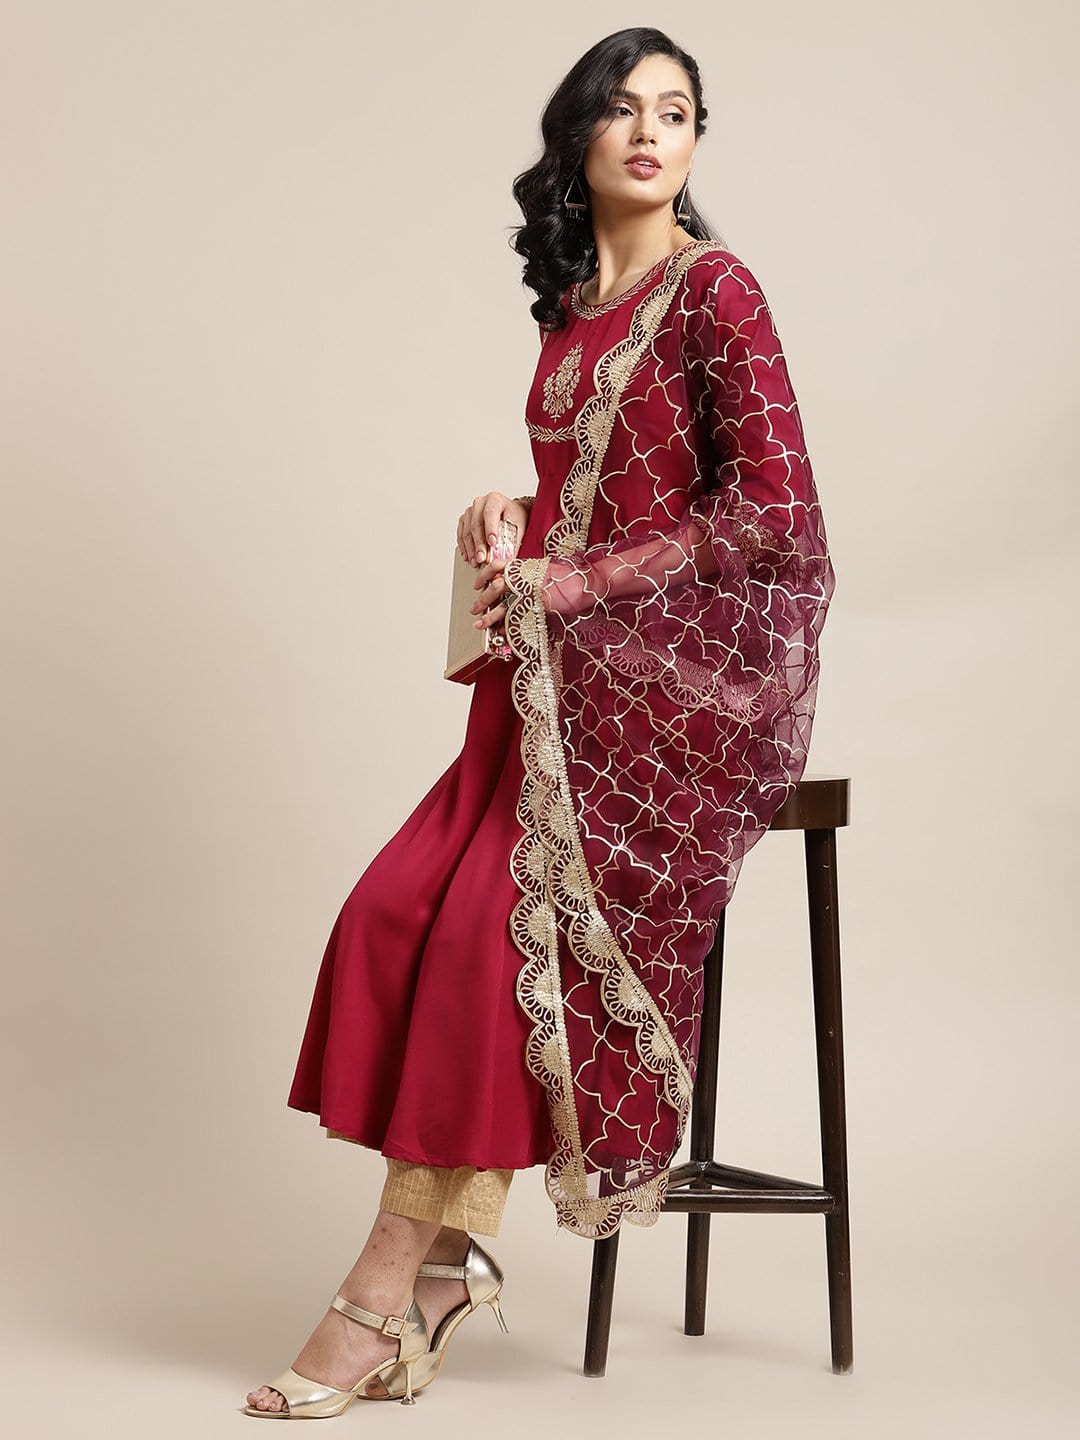 Women's Magenta And Gold Anarkali, Solid Kurta With Zari Work On Yoke And Paired With Gold Pant And Heavy Gota Embroidered Dupatta - Varanga